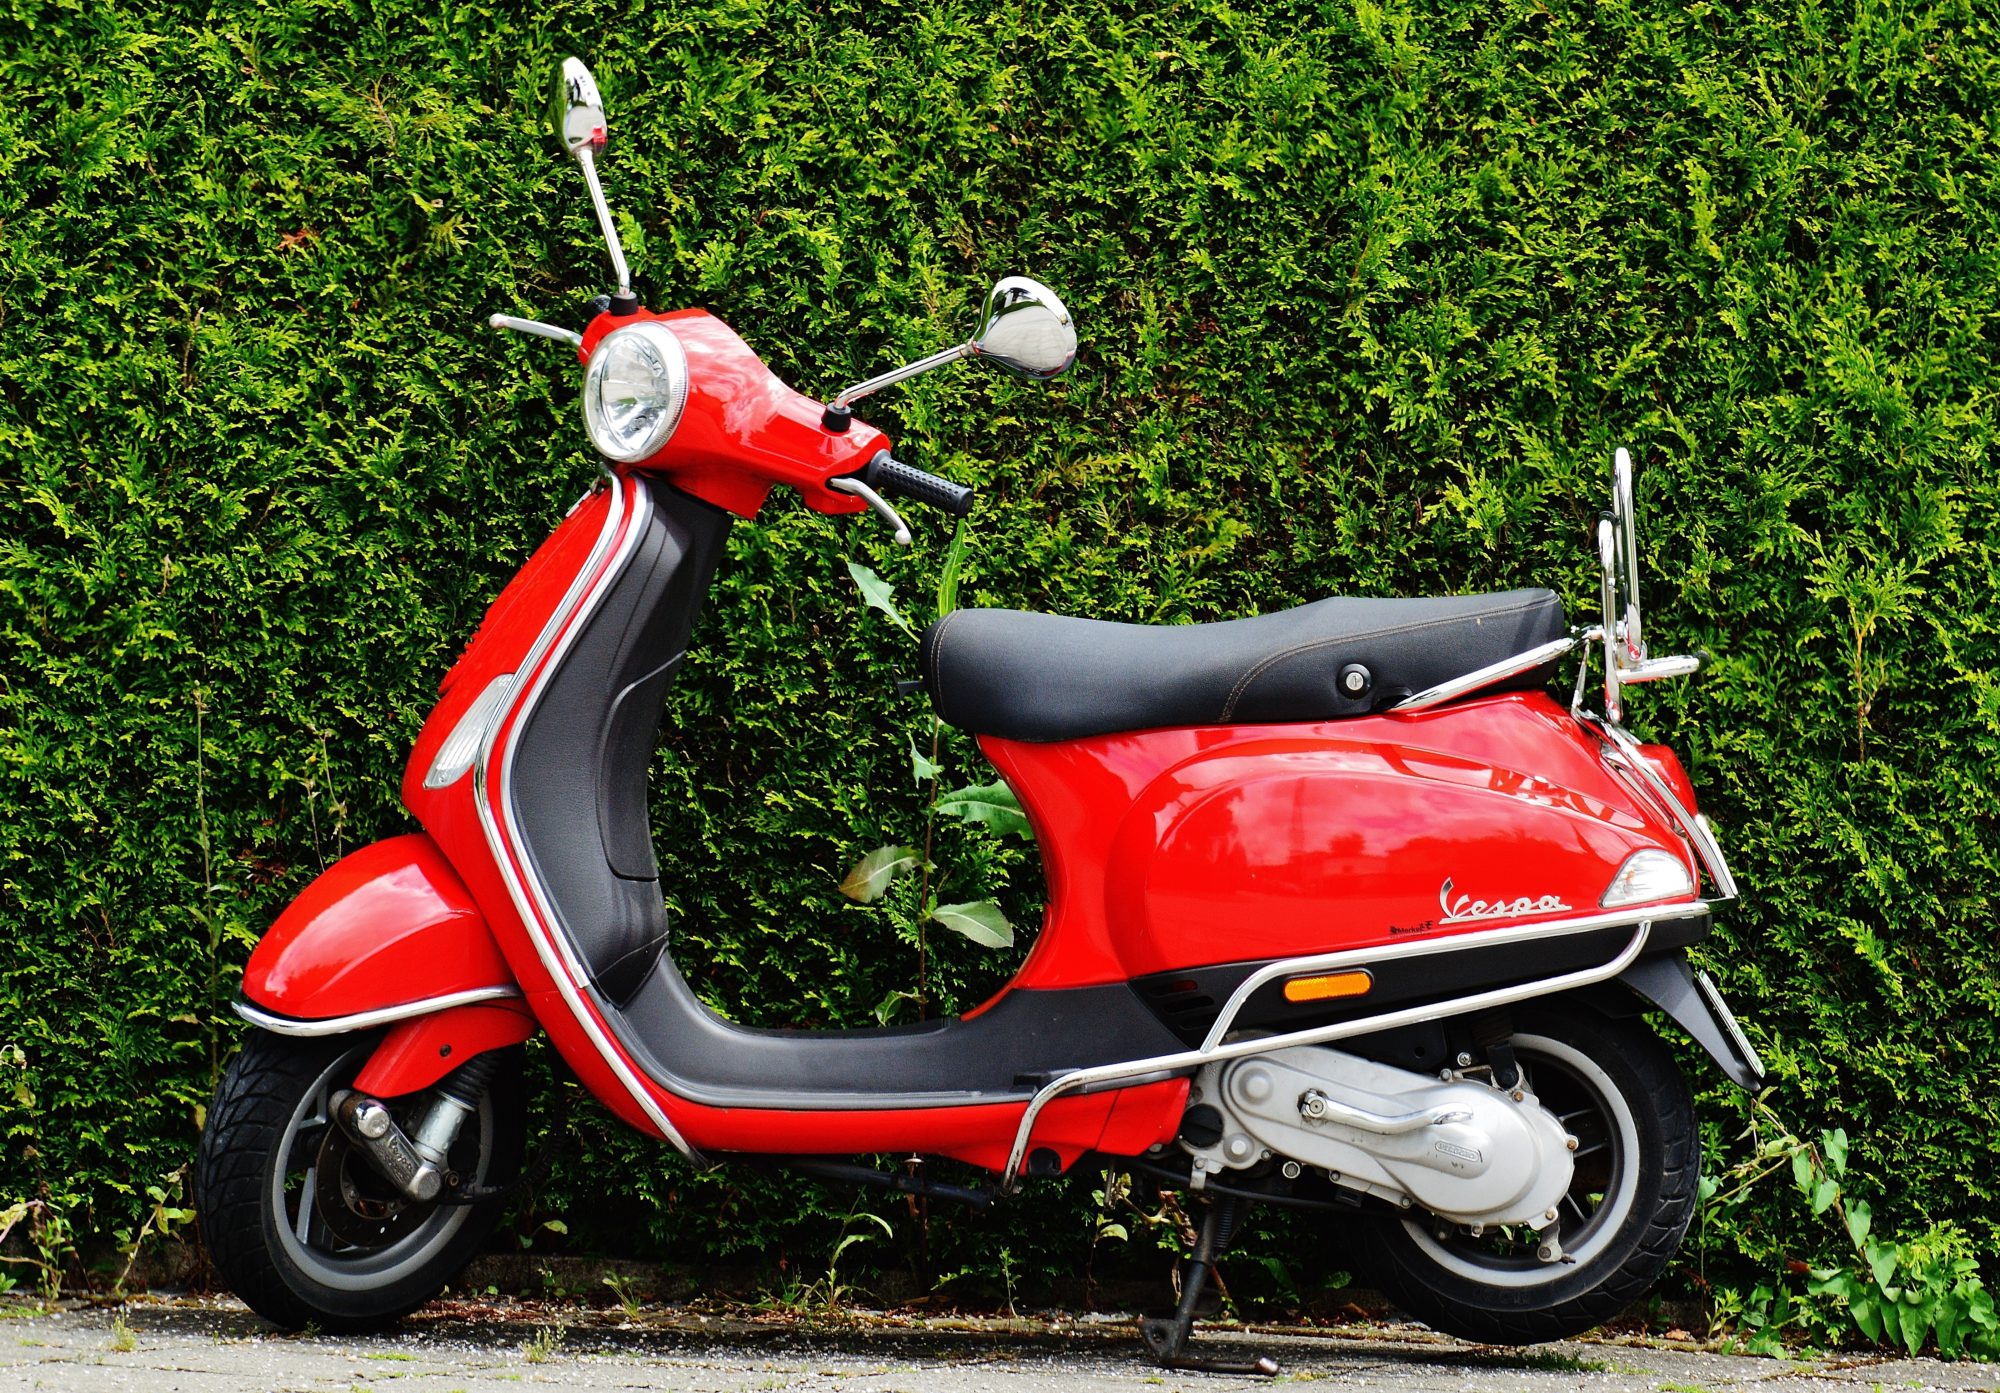 red-and-black-moped-scooter-beside-green-grass-159192